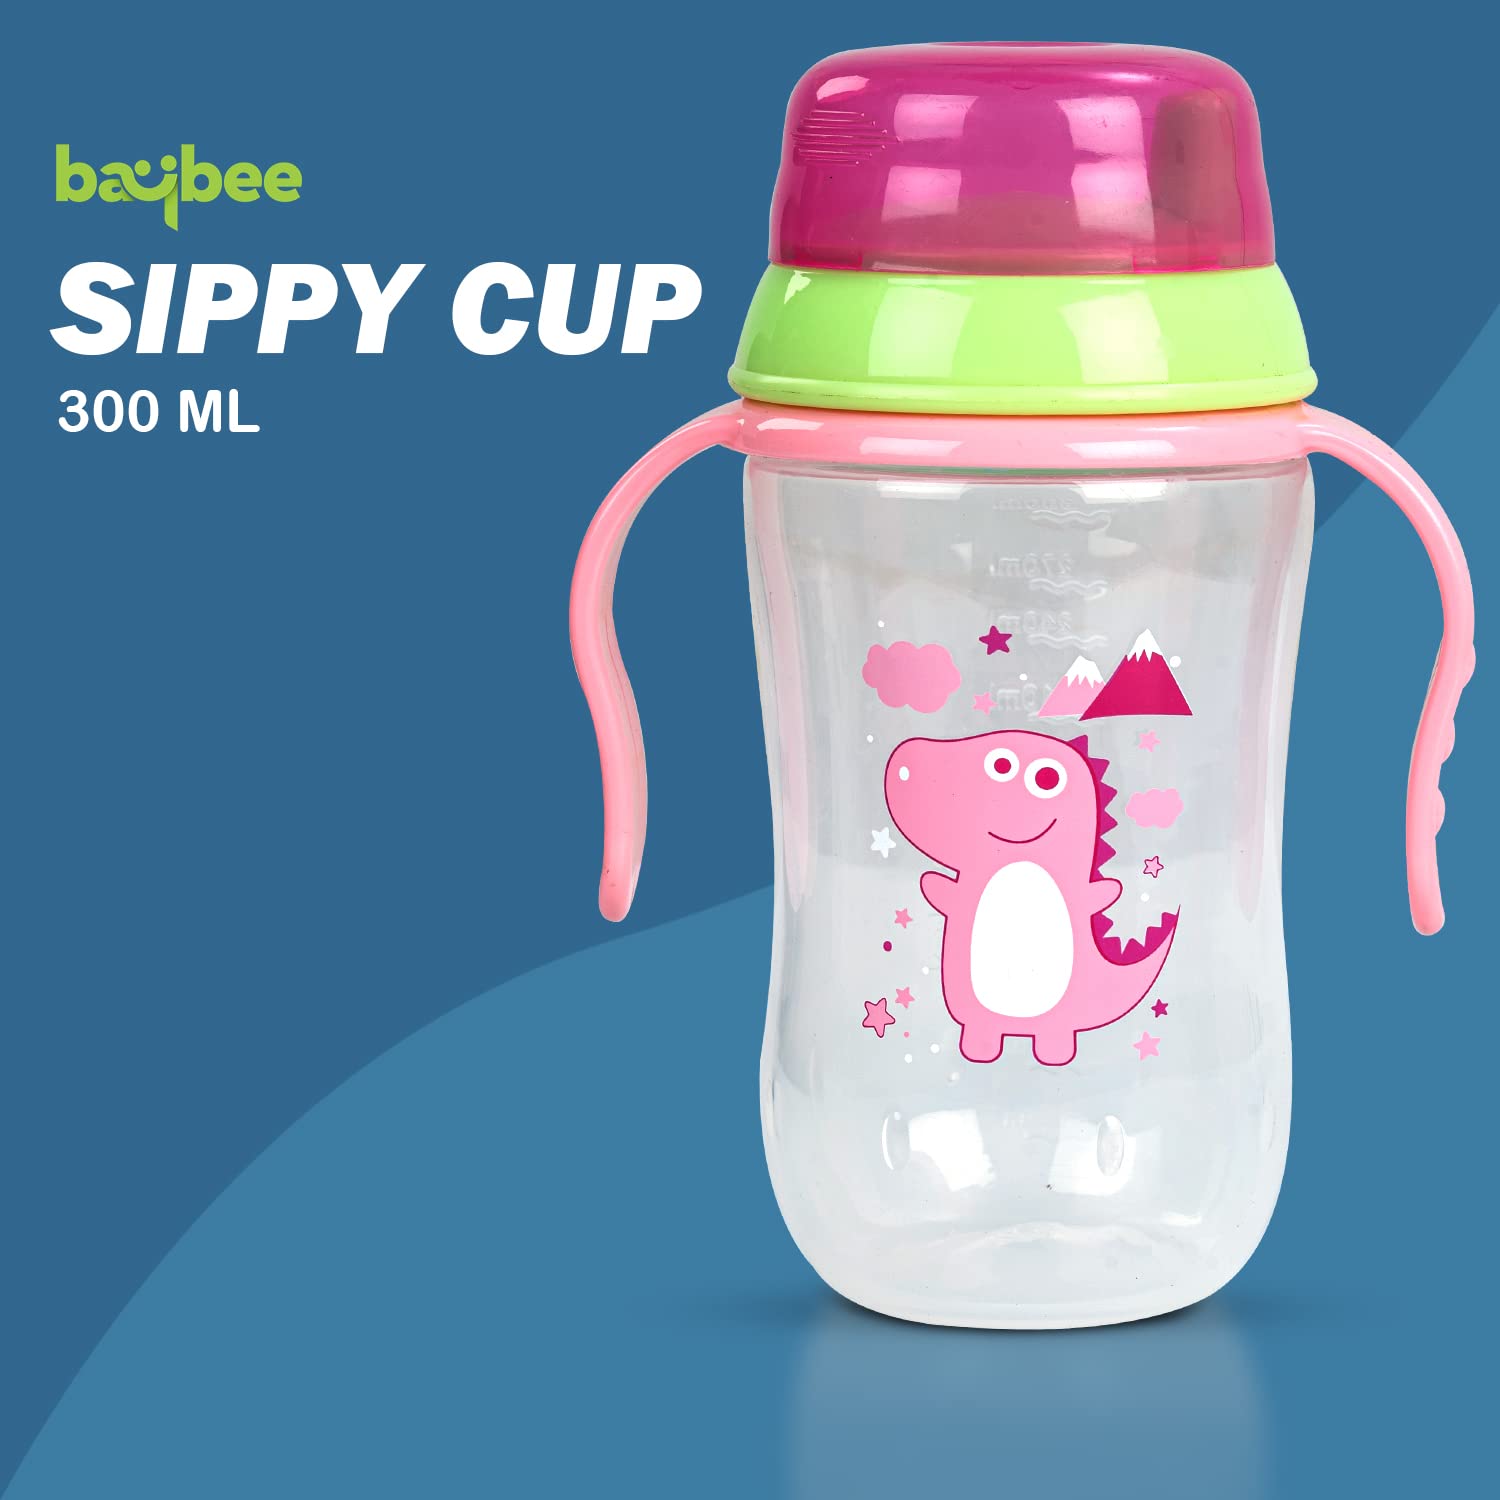 Sipper Bottle for Kids I BPA Free Anti-Spill Sippy Bottle I Train to Drink Sippy Bottle with Grasp Handle I 6 Months to 3 Years